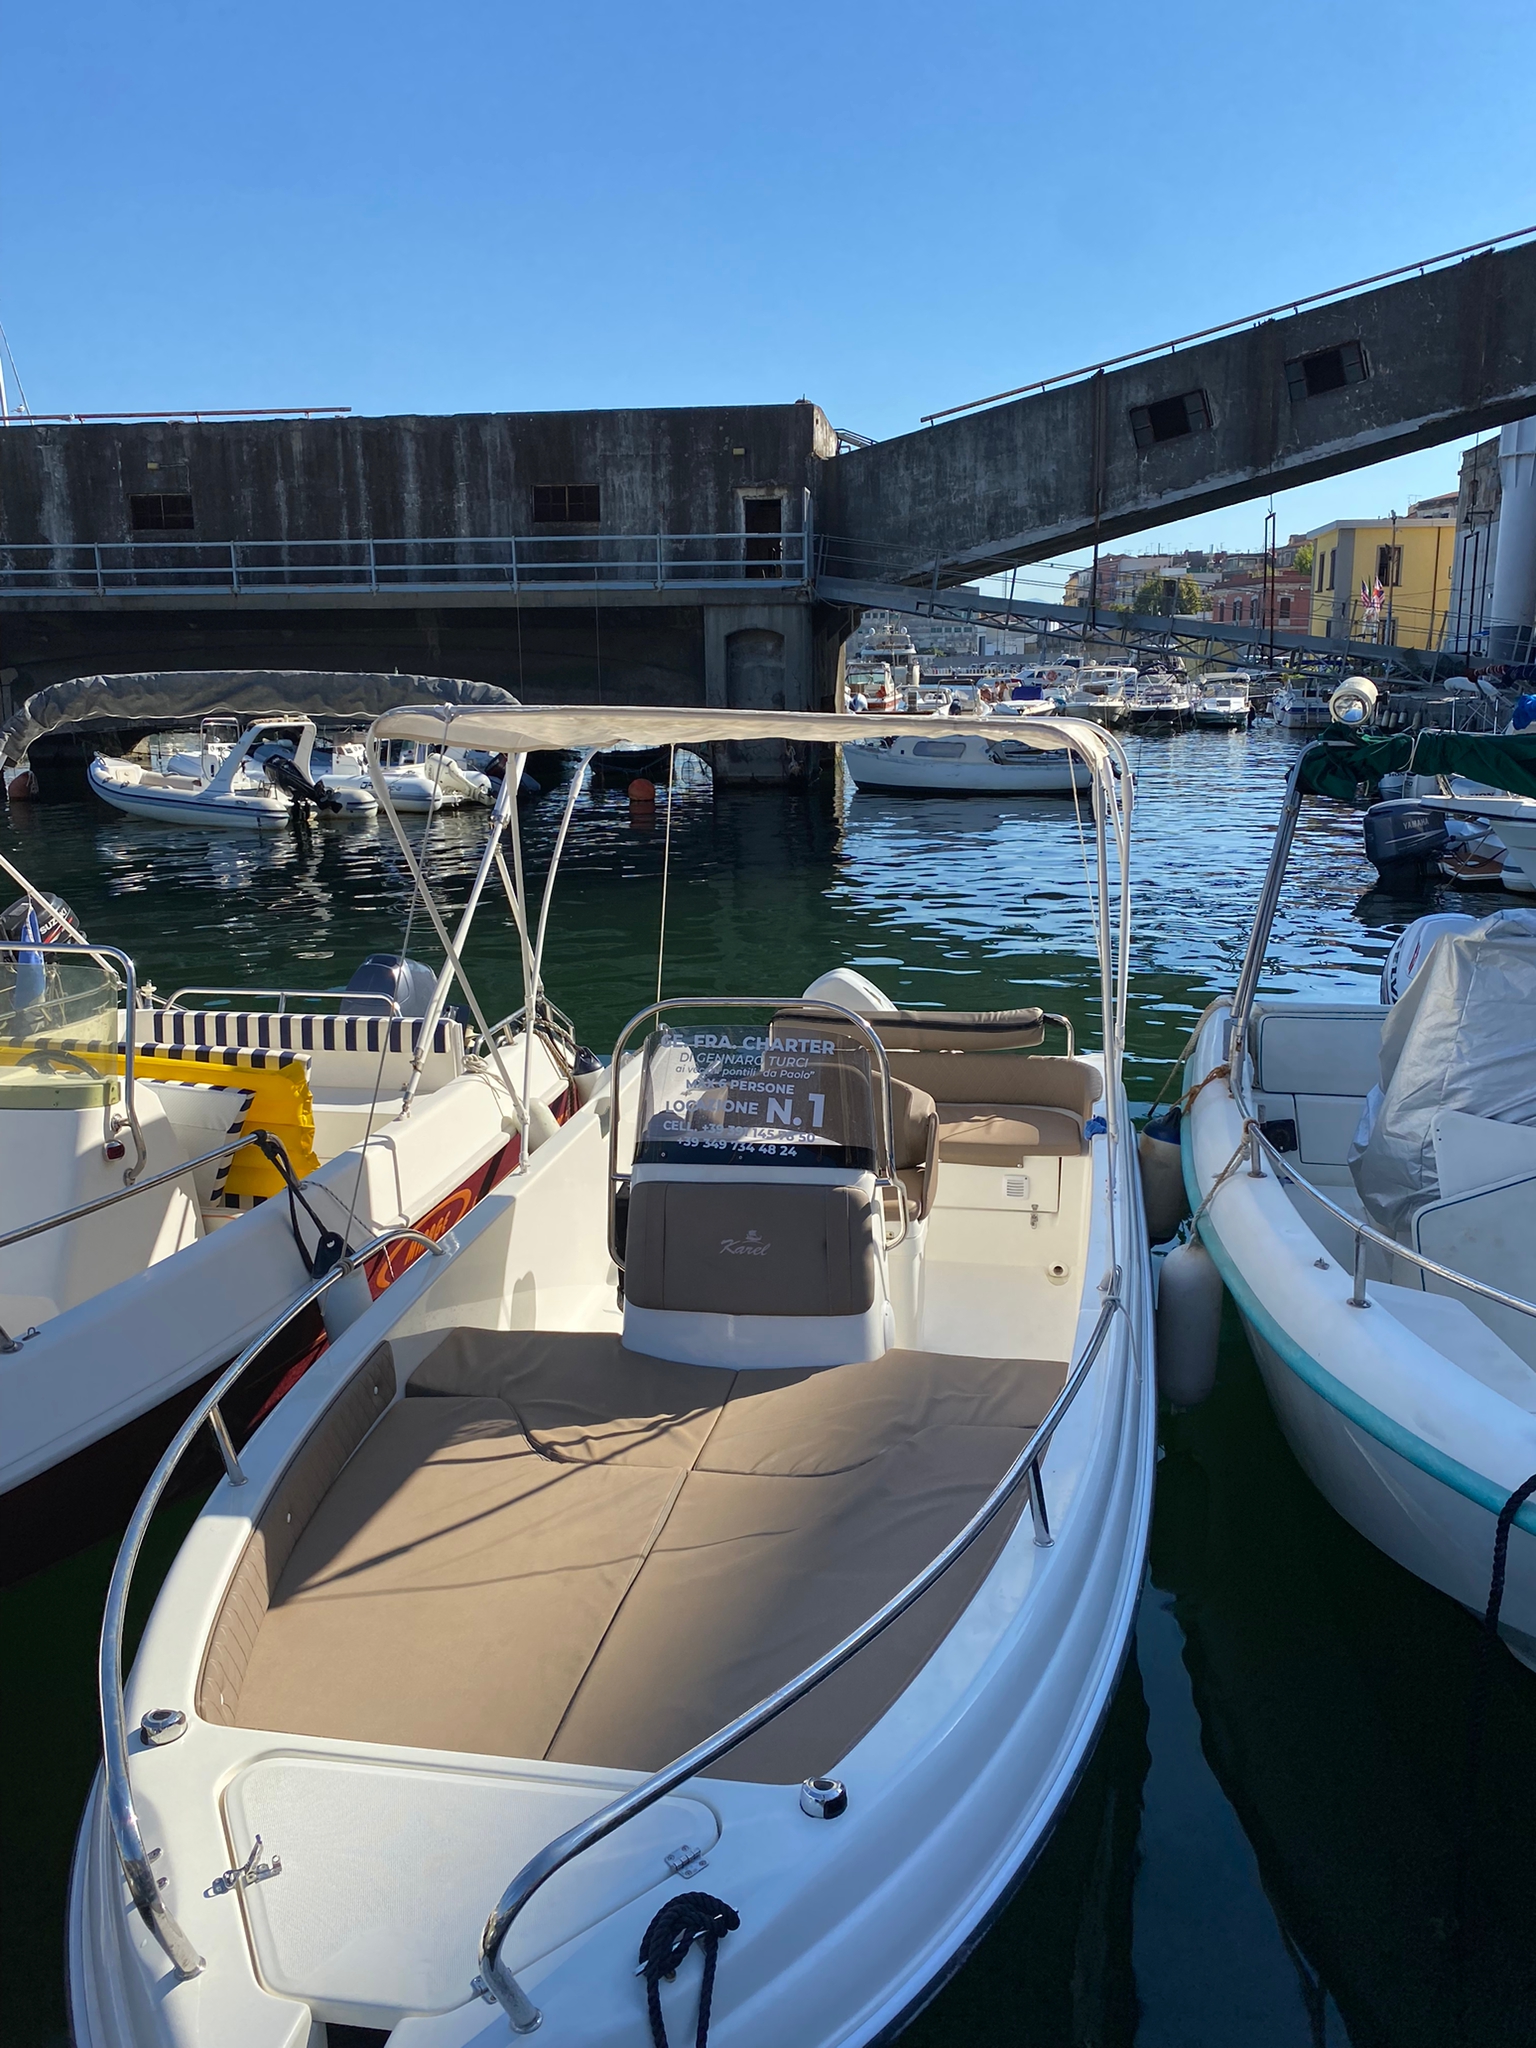 Ithaca 550 - Yacht Charter Naples & Boat hire in Italy Campania Bay of Naples Castellammare di Stabia Porto di Castellammare di Stabia 2